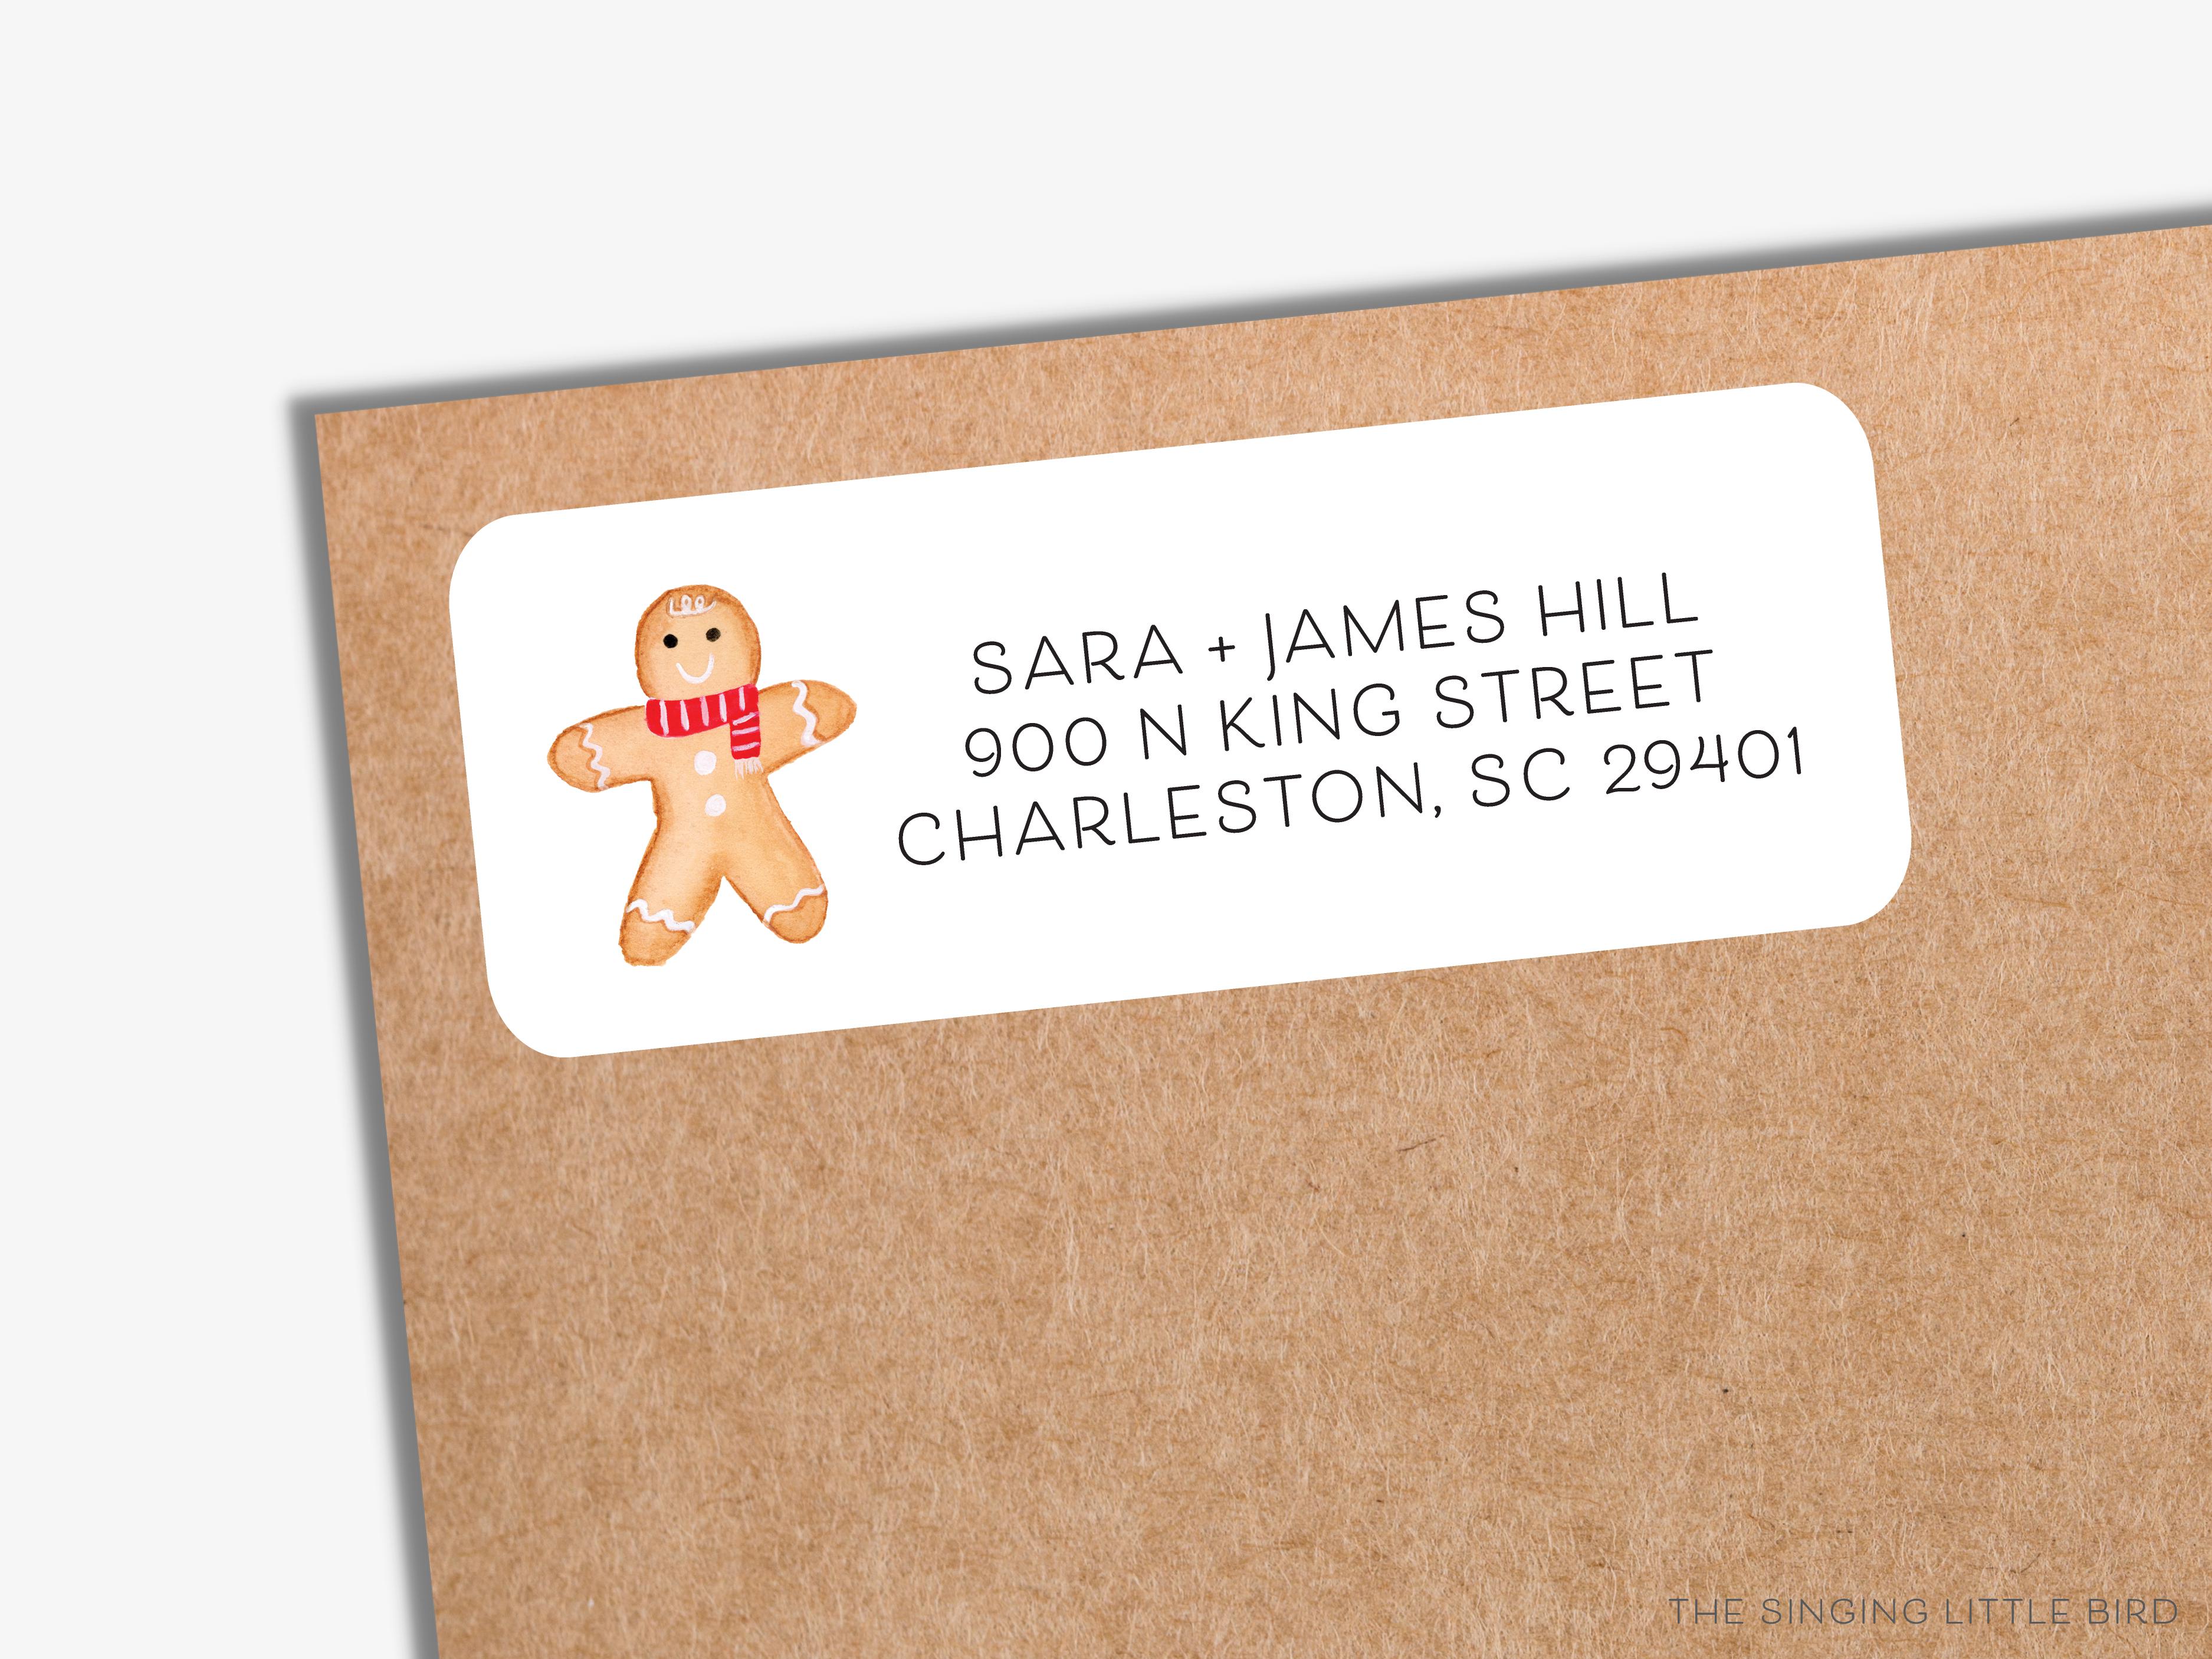 Gingerbread Man Return Address Labels-These personalized return address labels are 2.625" x 1" and feature our hand-painted watercolor Gingerbread Man, printed in the USA on beautiful matte finish labels. These make great gifts for yourself or the Christmas cookie lover.-The Singing Little Bird